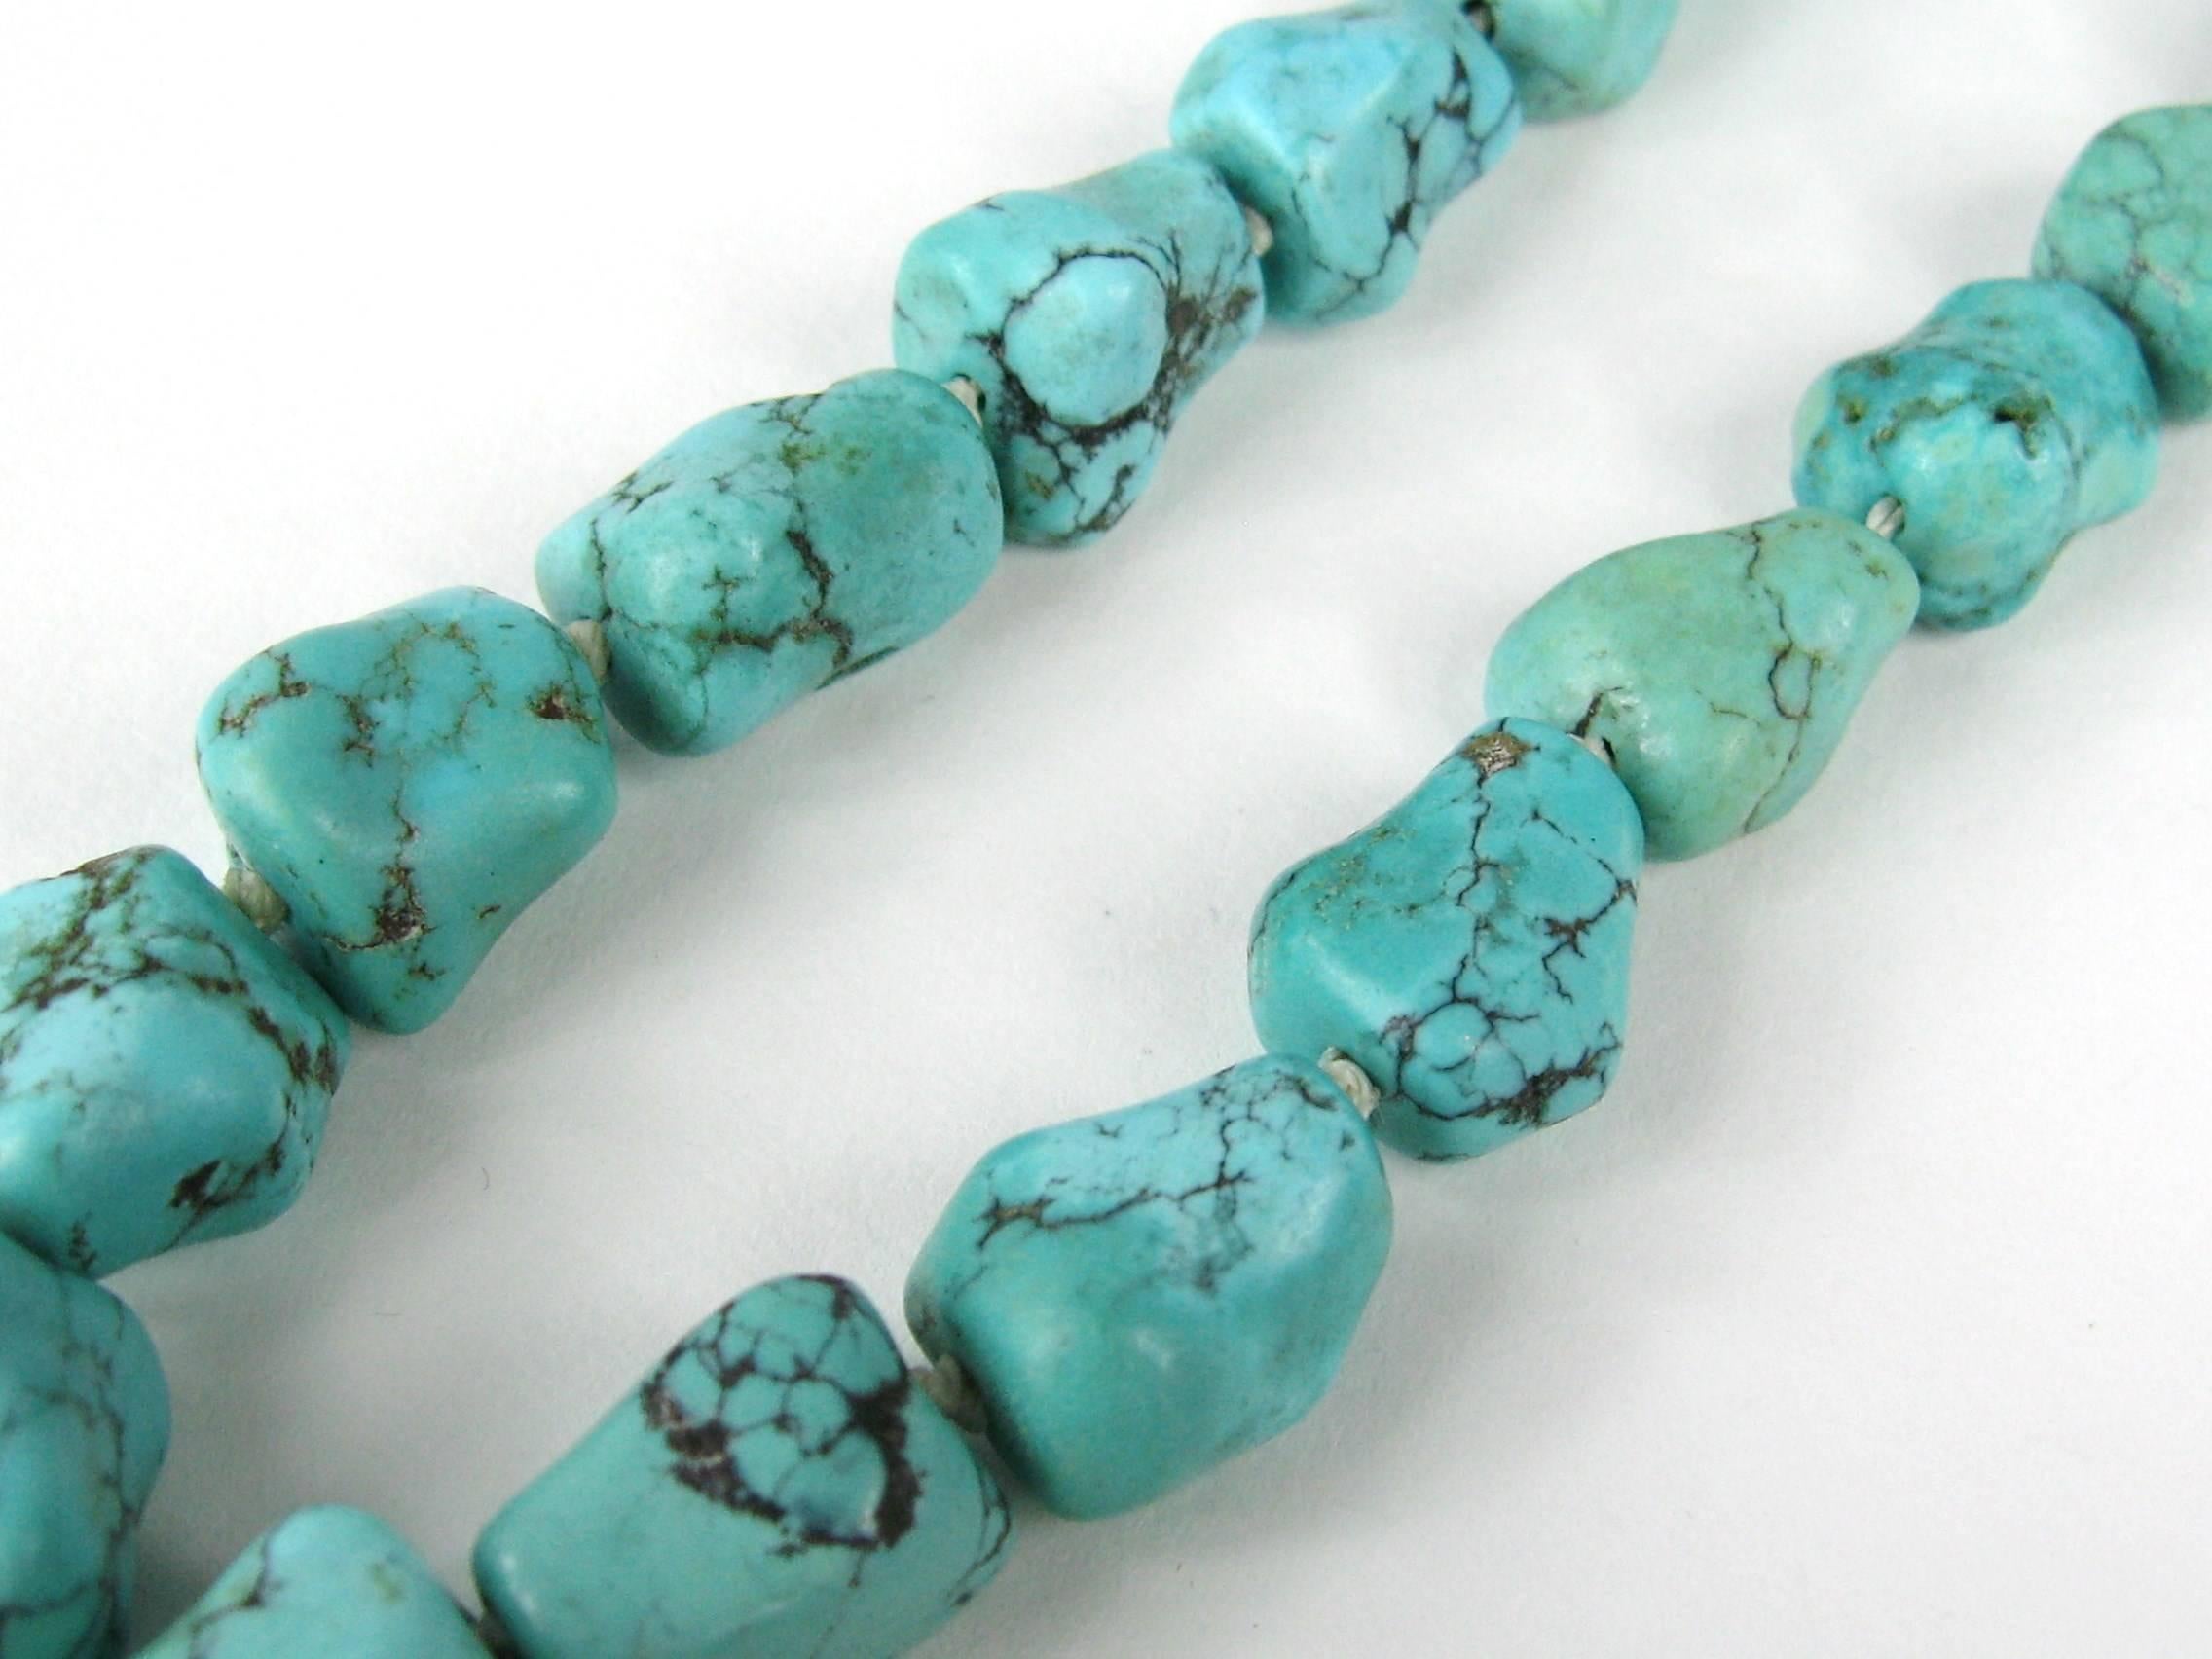 Graduated Turquoise nuggets
Hand tied 
14K gold clasp 
Stones measures 
13.5mm down to 4.26mm 
Necklace is 24.5